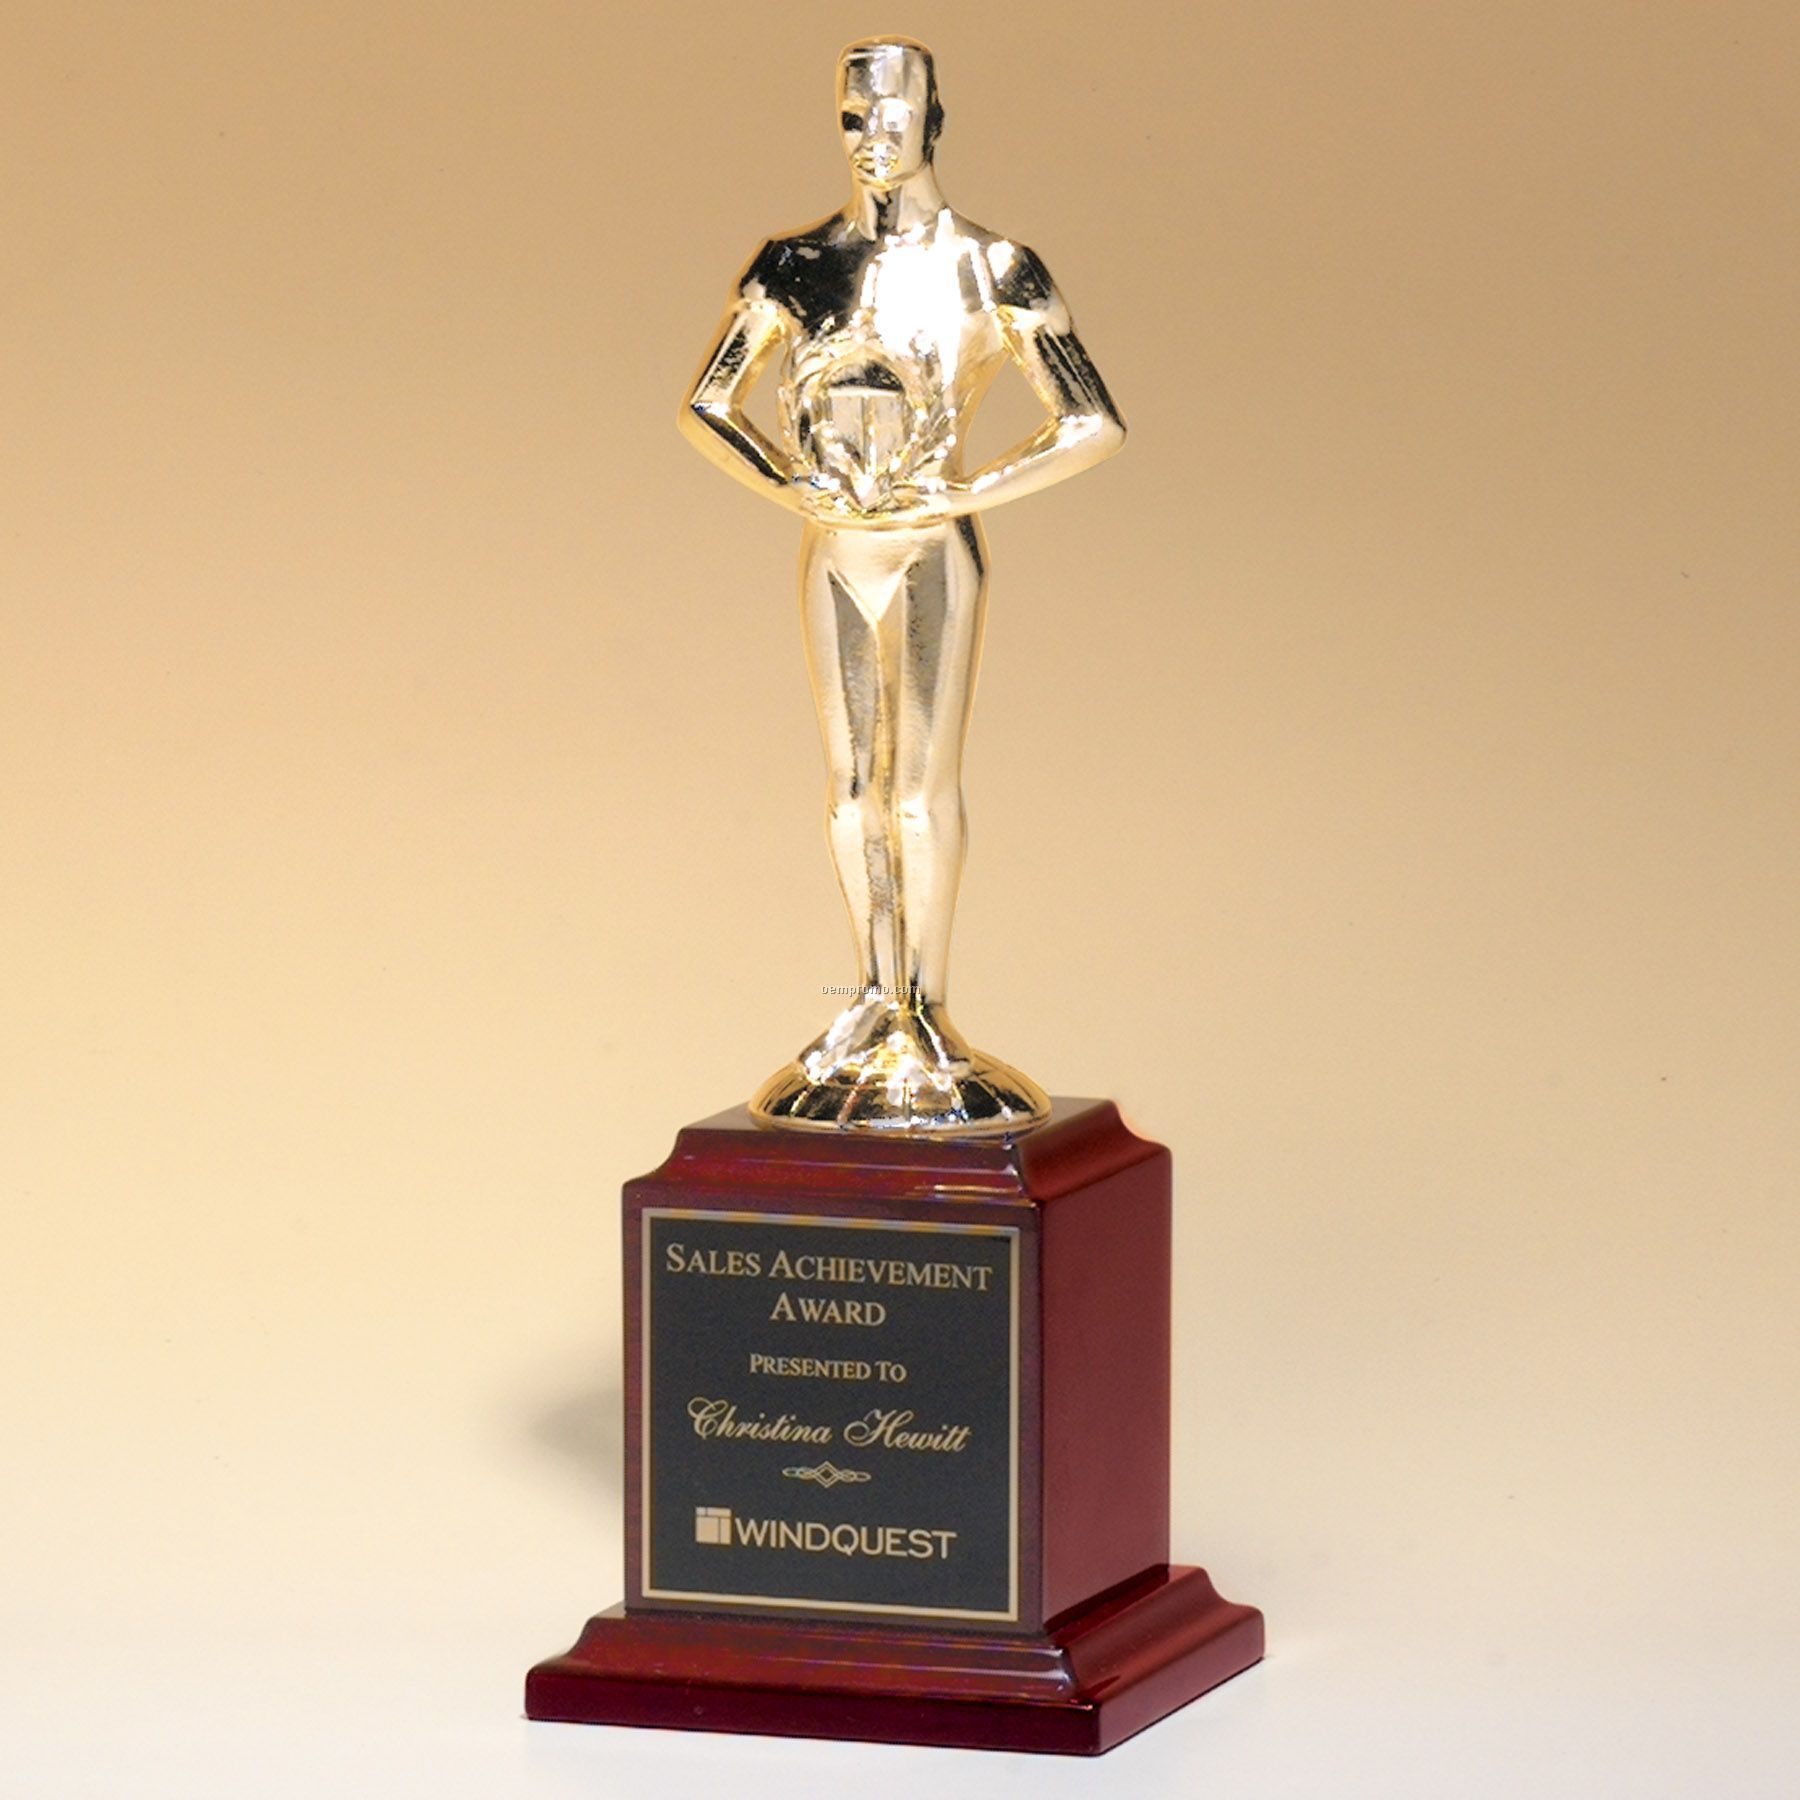 Cast Metal Trophy Of Classic Achiever Figure On Rosewood Stained Base